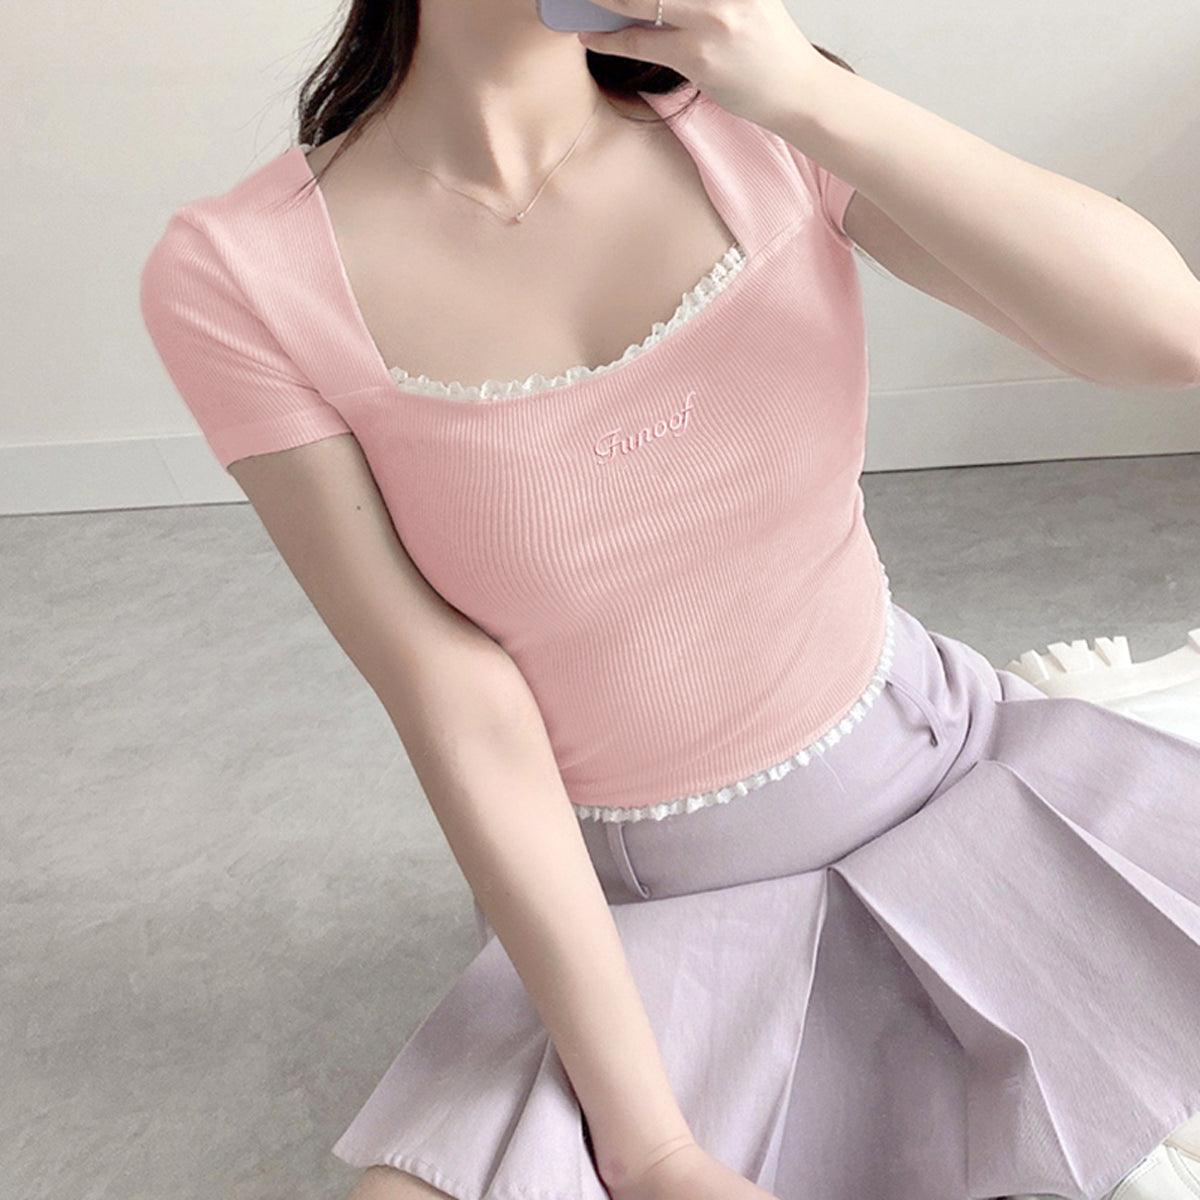 Pastel Pink Soft Girl Crop Top - Aesthetic Clothes Shop